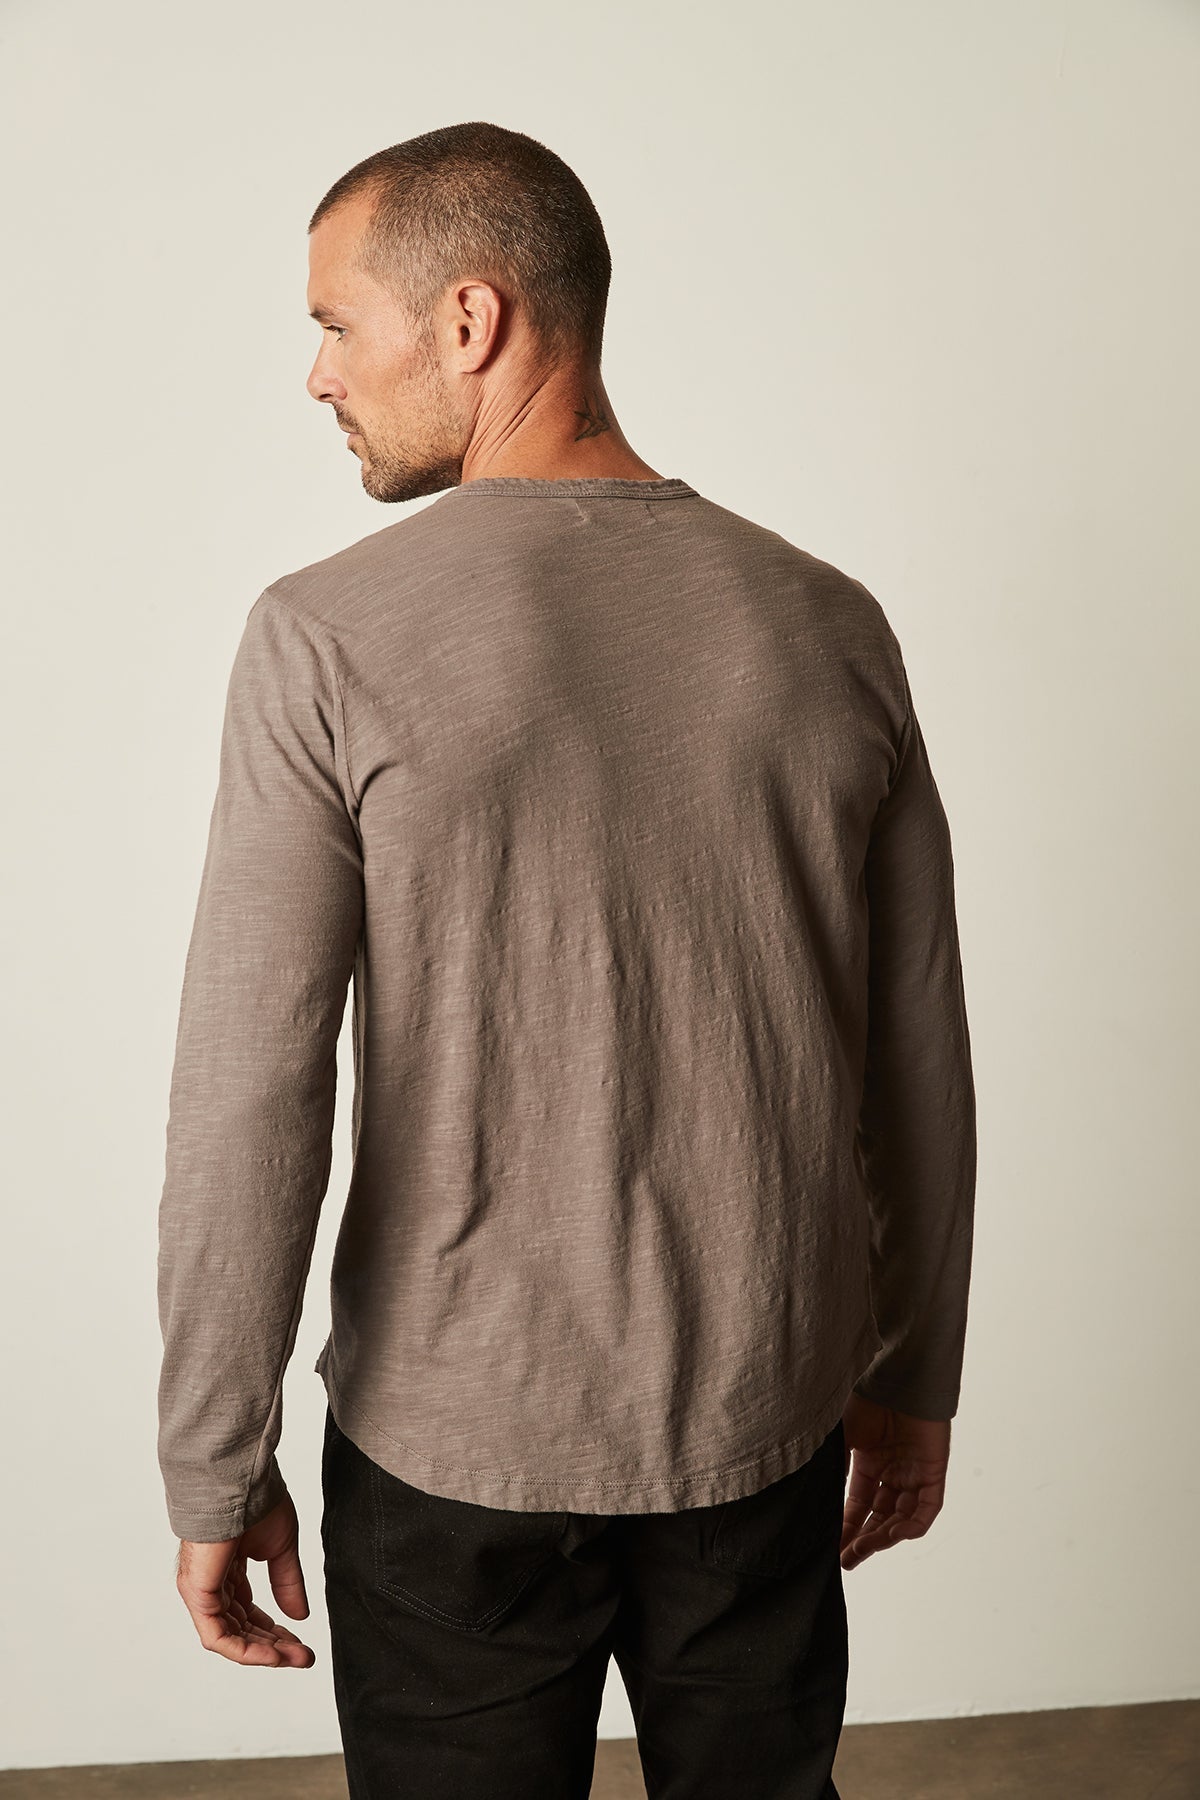 The back view of a man wearing a Velvet by Graham & Spencer KAI CREW NECK TEE, perfect as a layering piece.-25793842413761